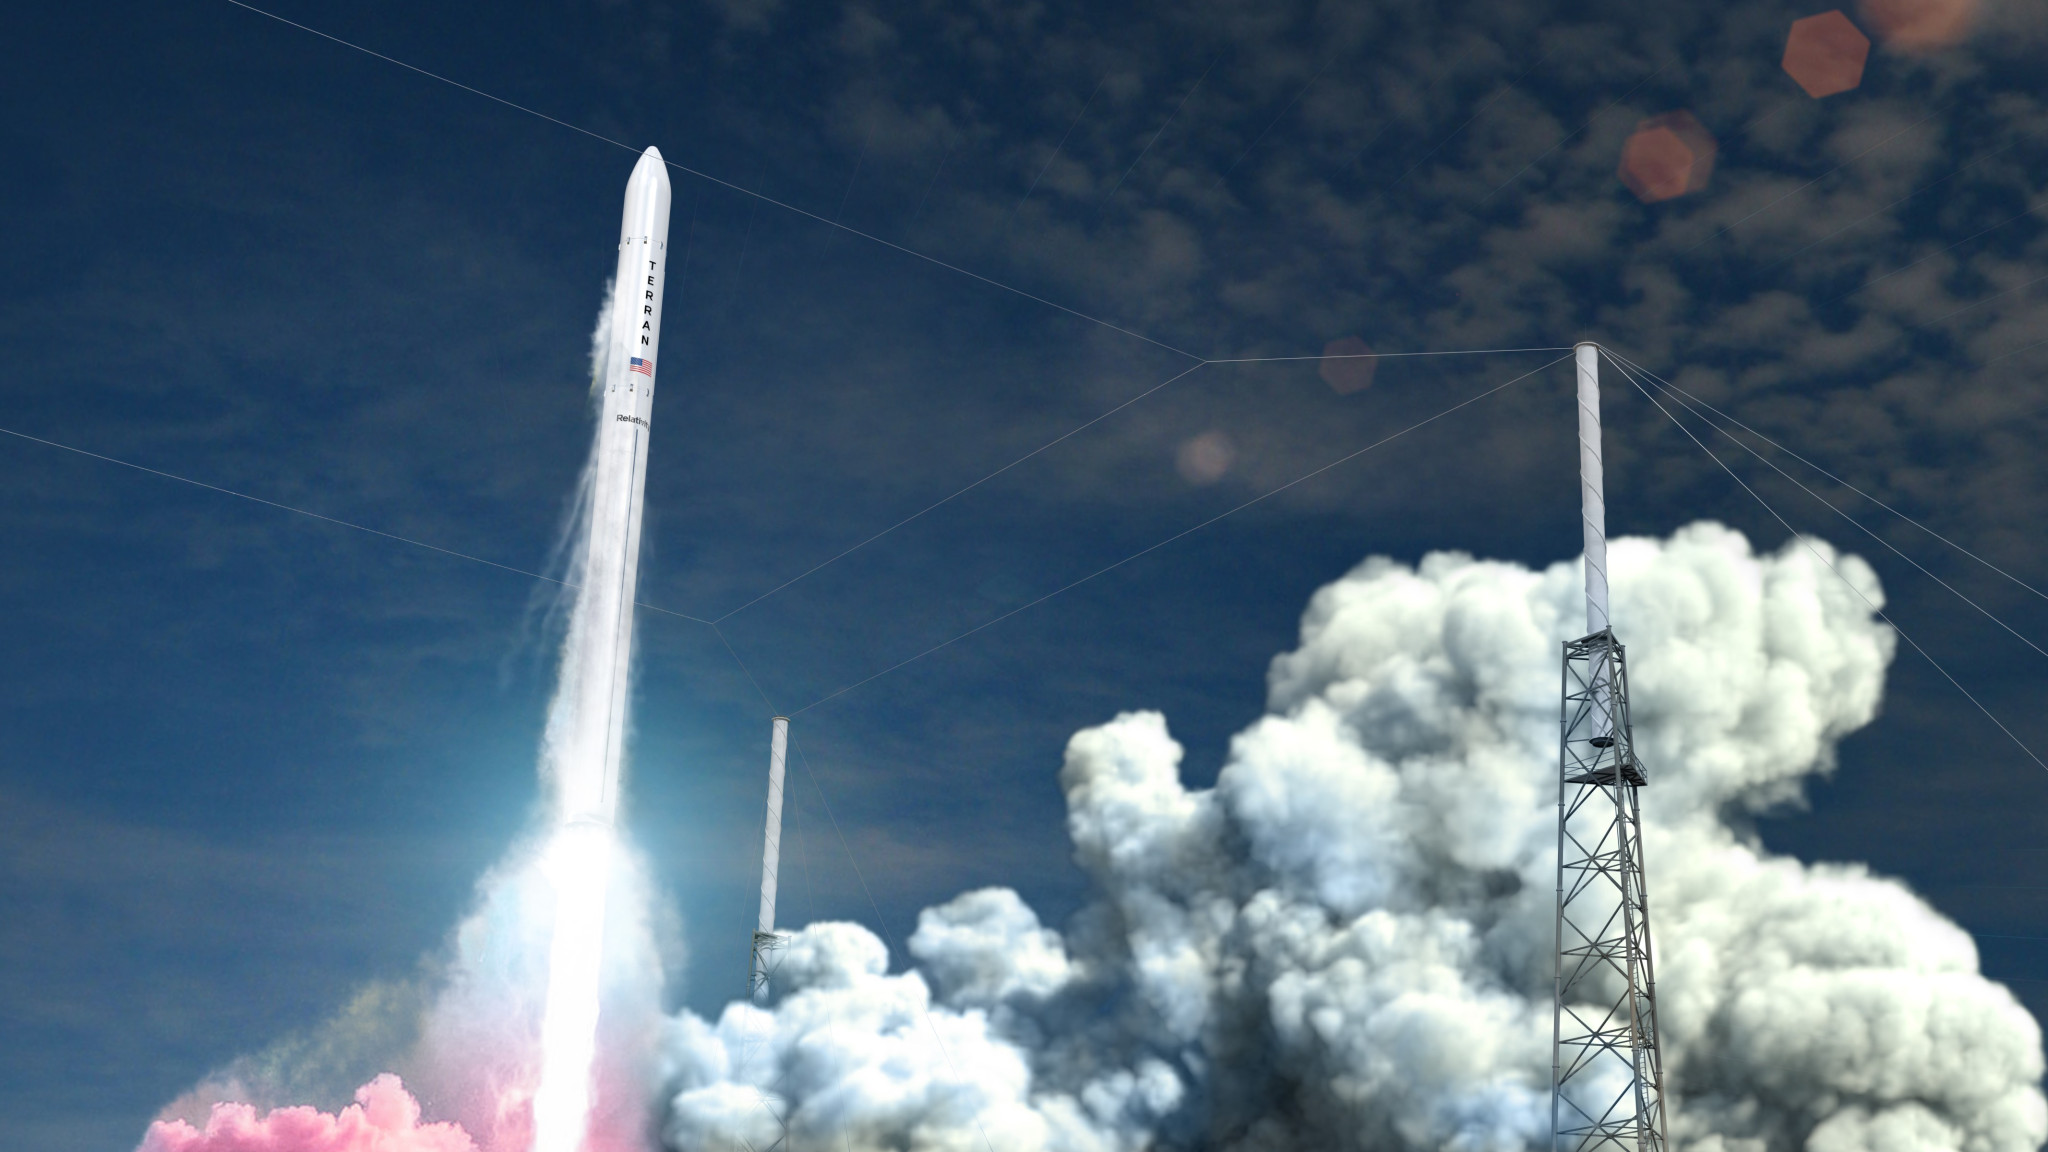 Relativity is pushing back the demo launch of its Terran 1 rocket to early 2022 | TechCrunch